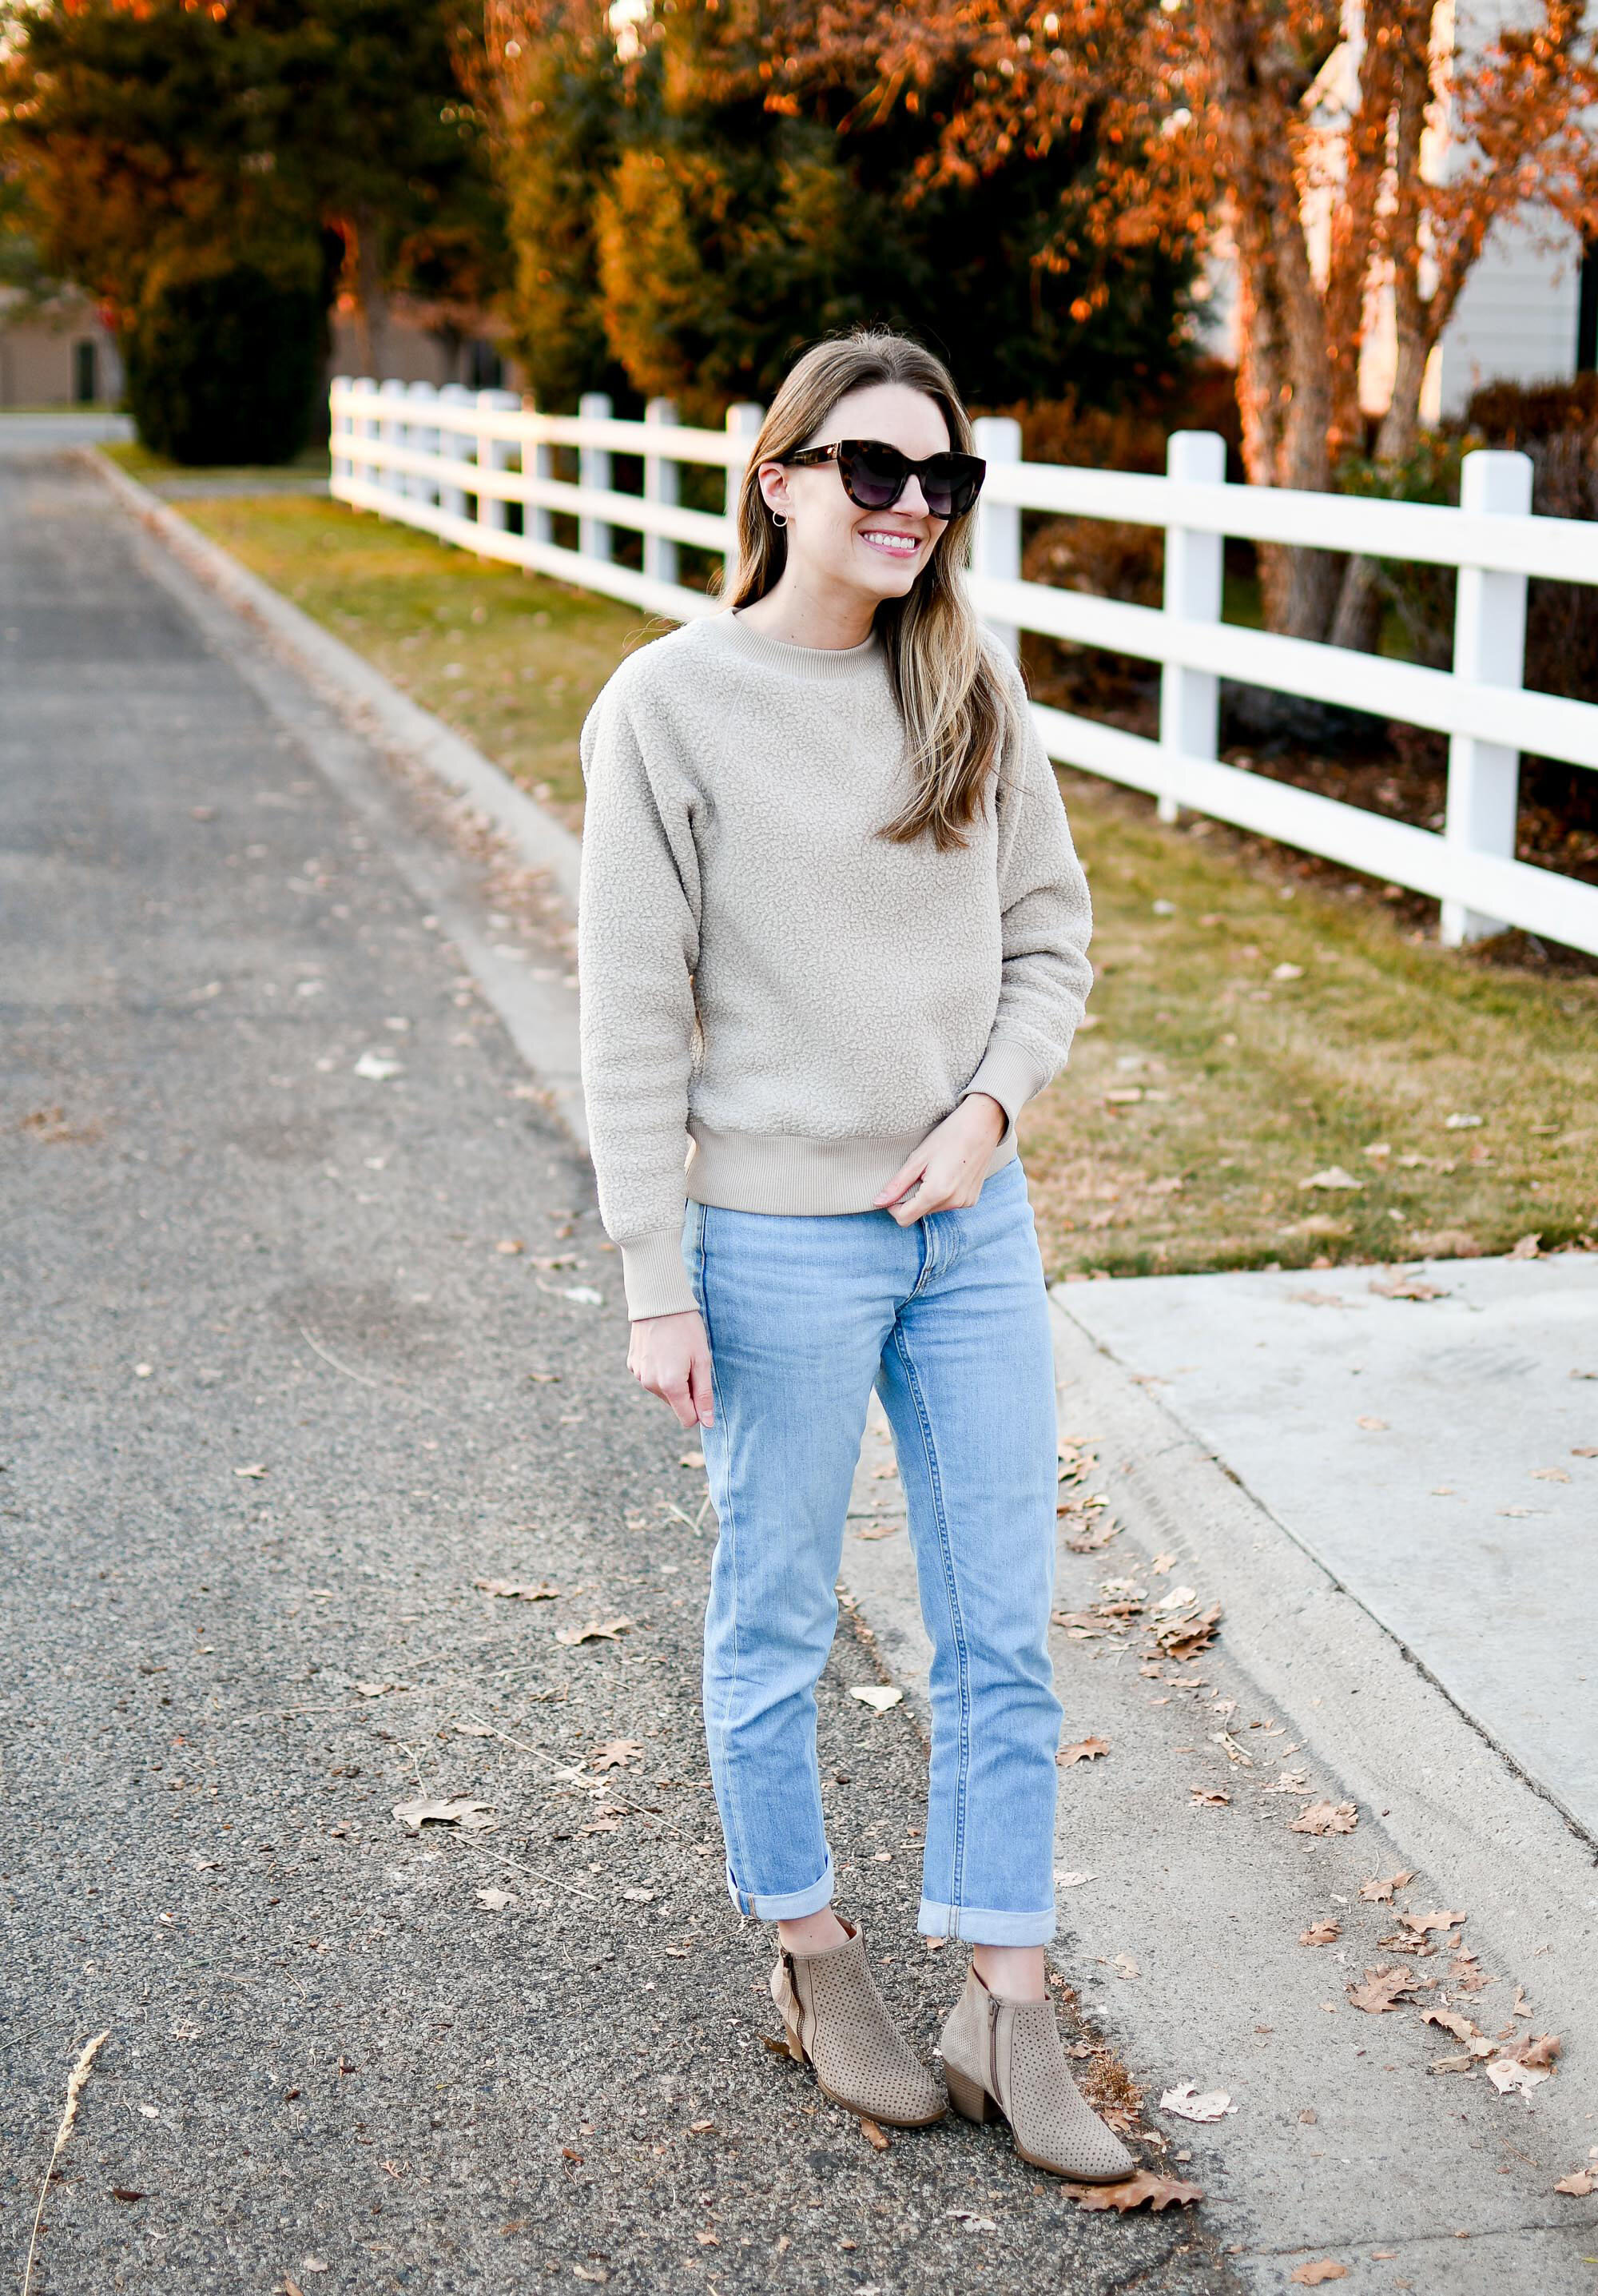 Fall outfit to wear to work from home / Everlane ReNew fleece sweatshirt + boyfriend jeans — Cotton Cashmere Cat Hair